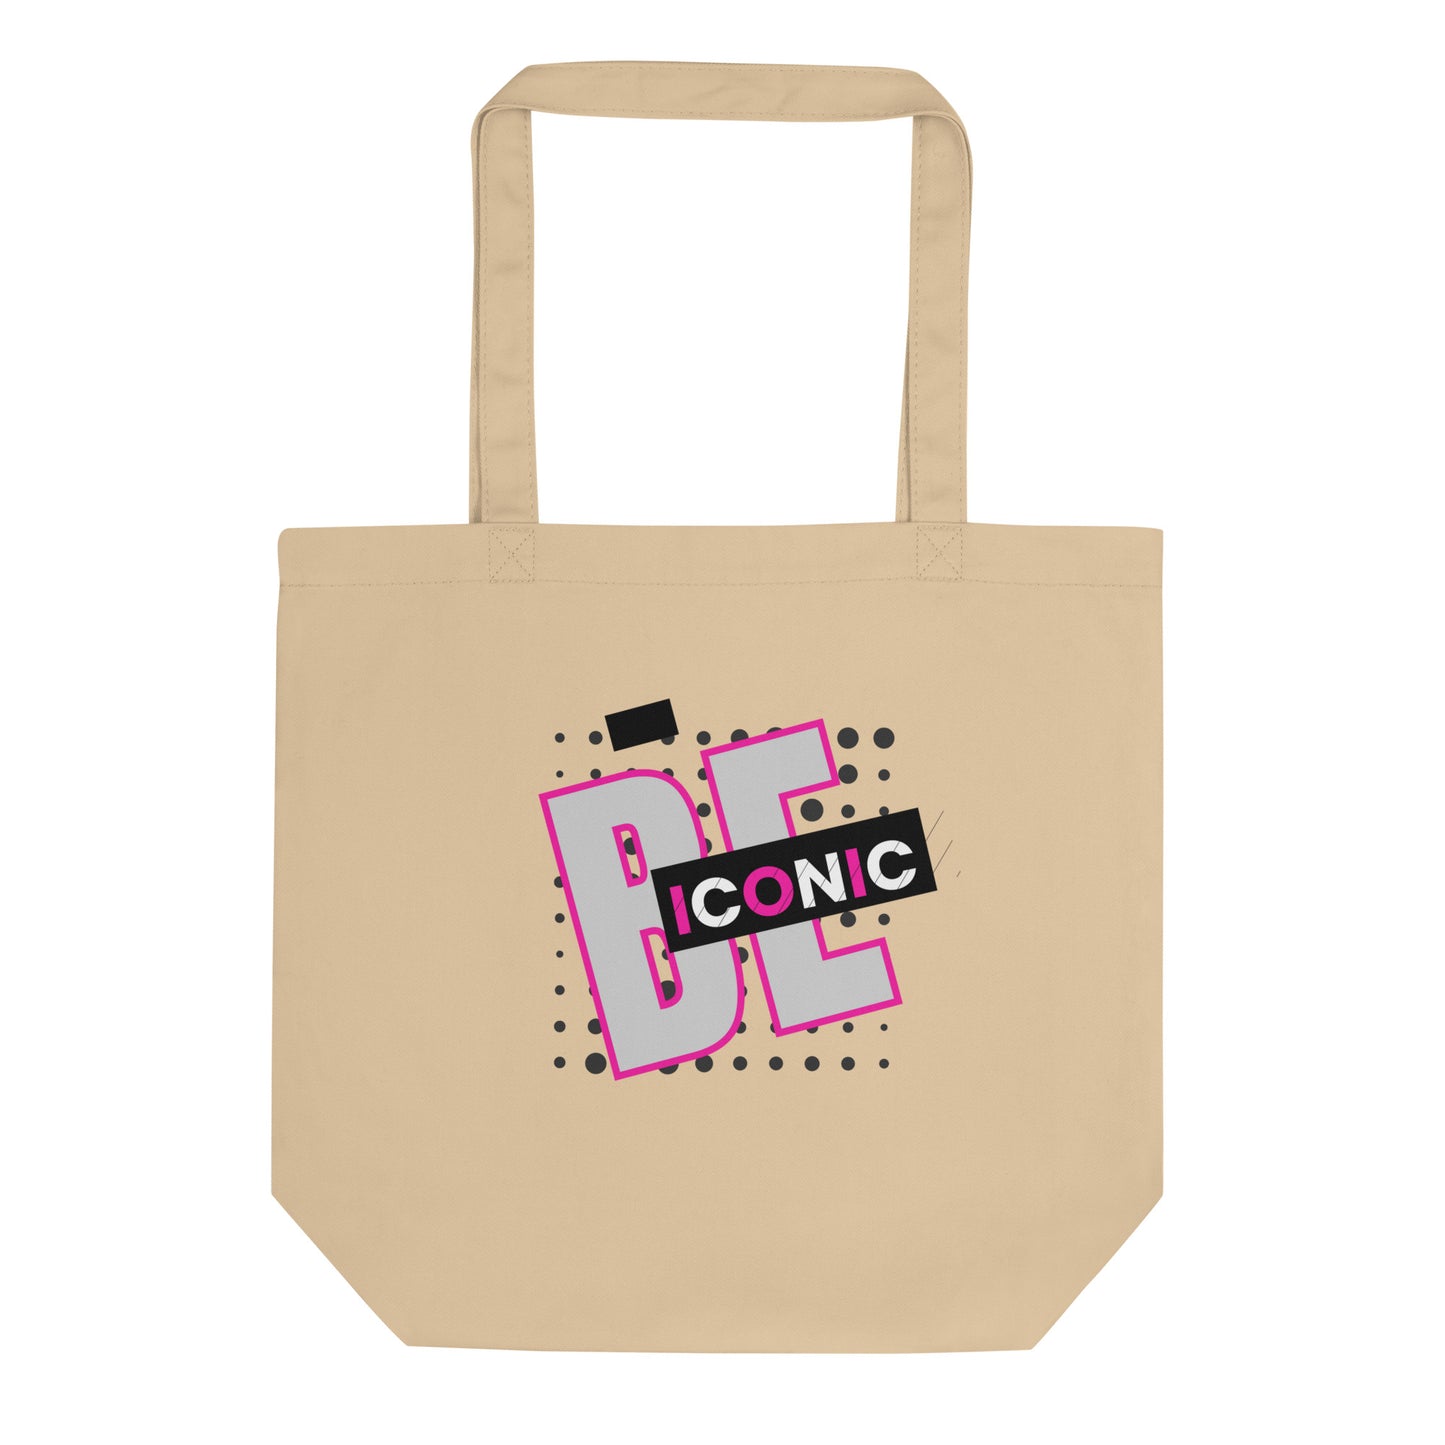 “Be Iconic” Eco Tote Bag